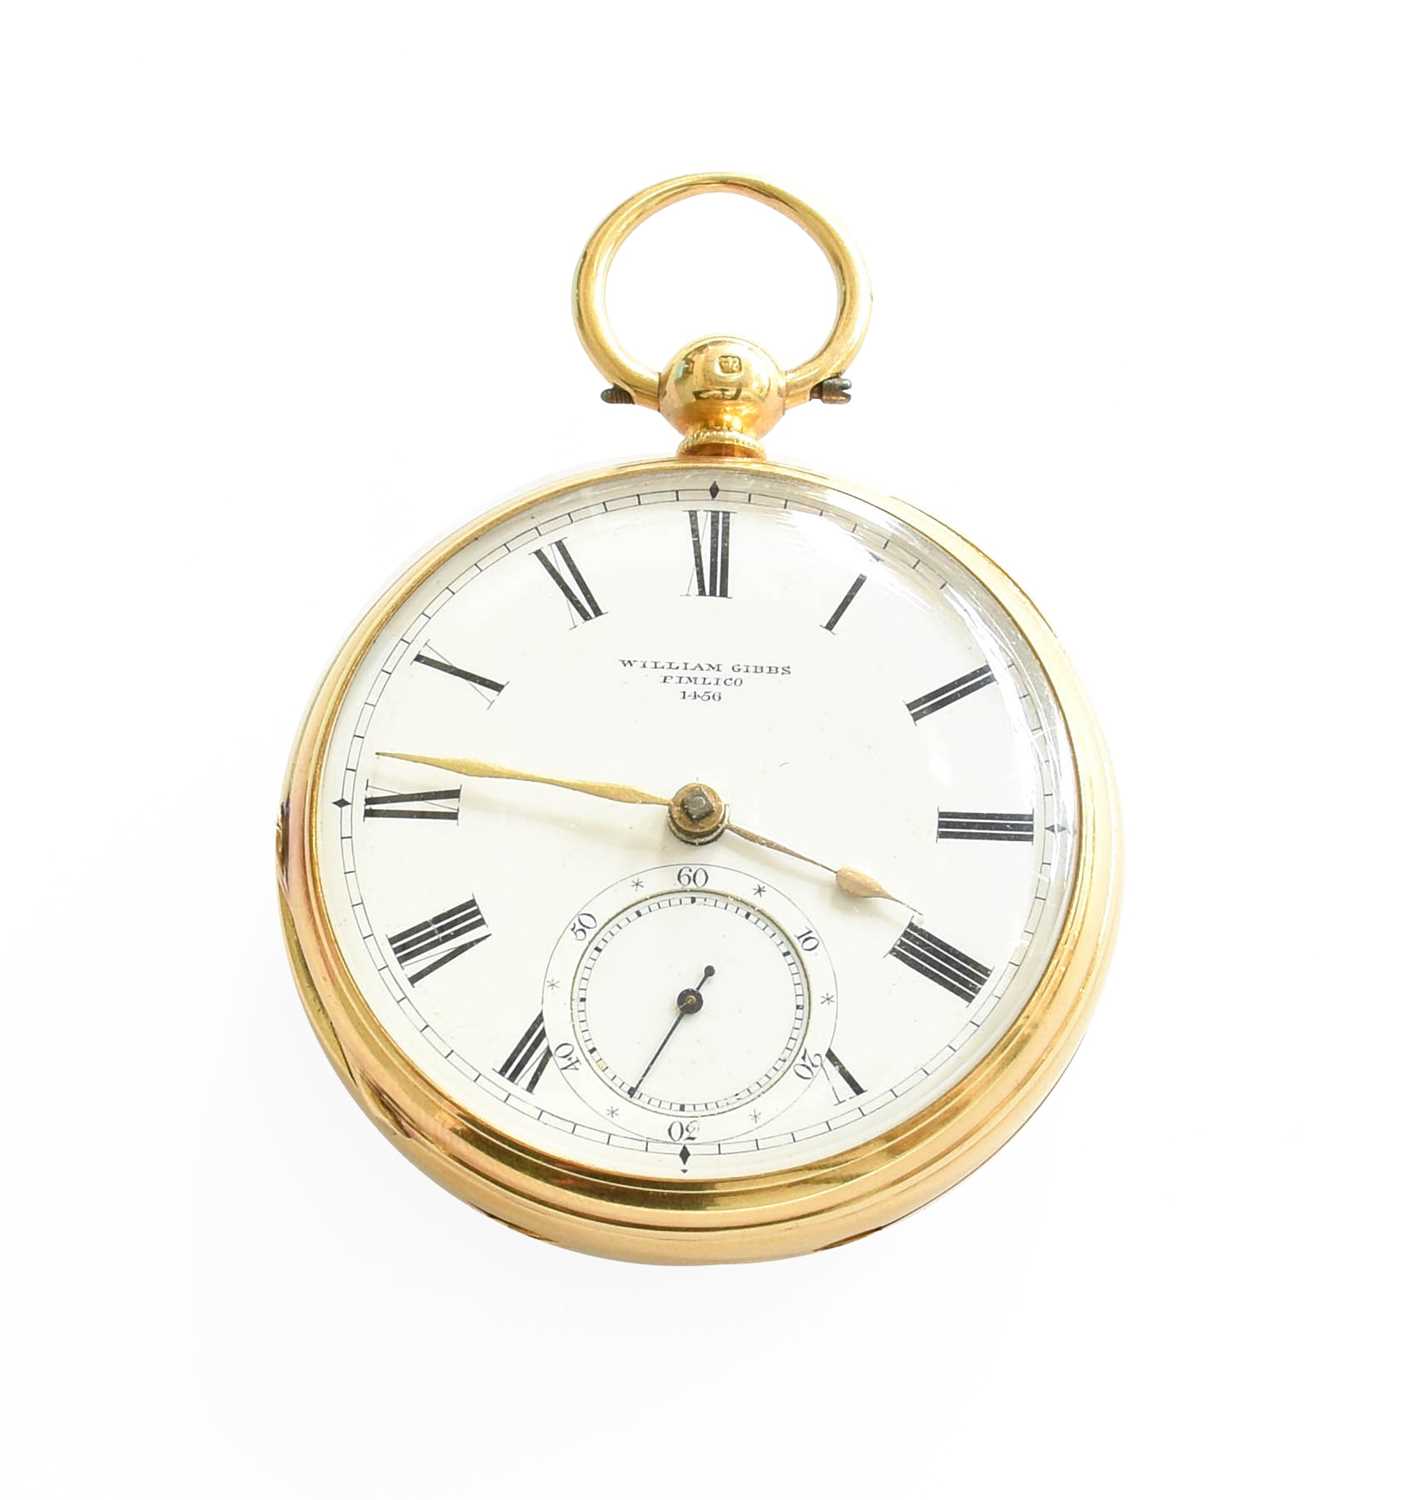 An 18 carat gold open faced pocket watched, signed William Gibbs Pimlico, number 1456, with original